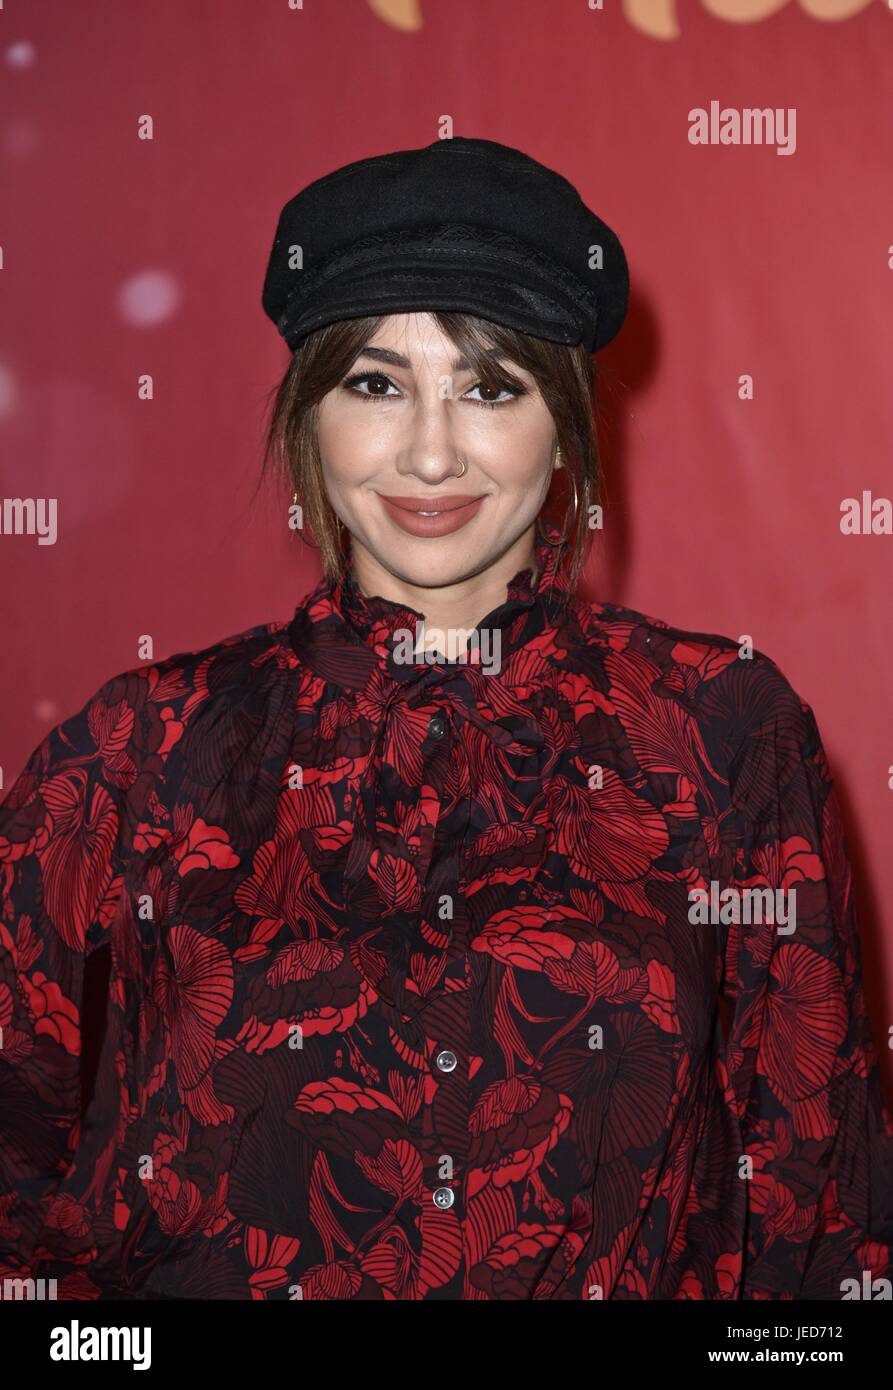 New York, NY, USA. 23rd June, 2017. Jackie Cruz in attendance for Madame Tussauds New York Unveils Selena Quintanilla's Wax Figure to Launch, Madame Tussauds, New York, NY June 23, 2017. Credit: Derek Storm/Everett Collection/Alamy Live News Stock Photo